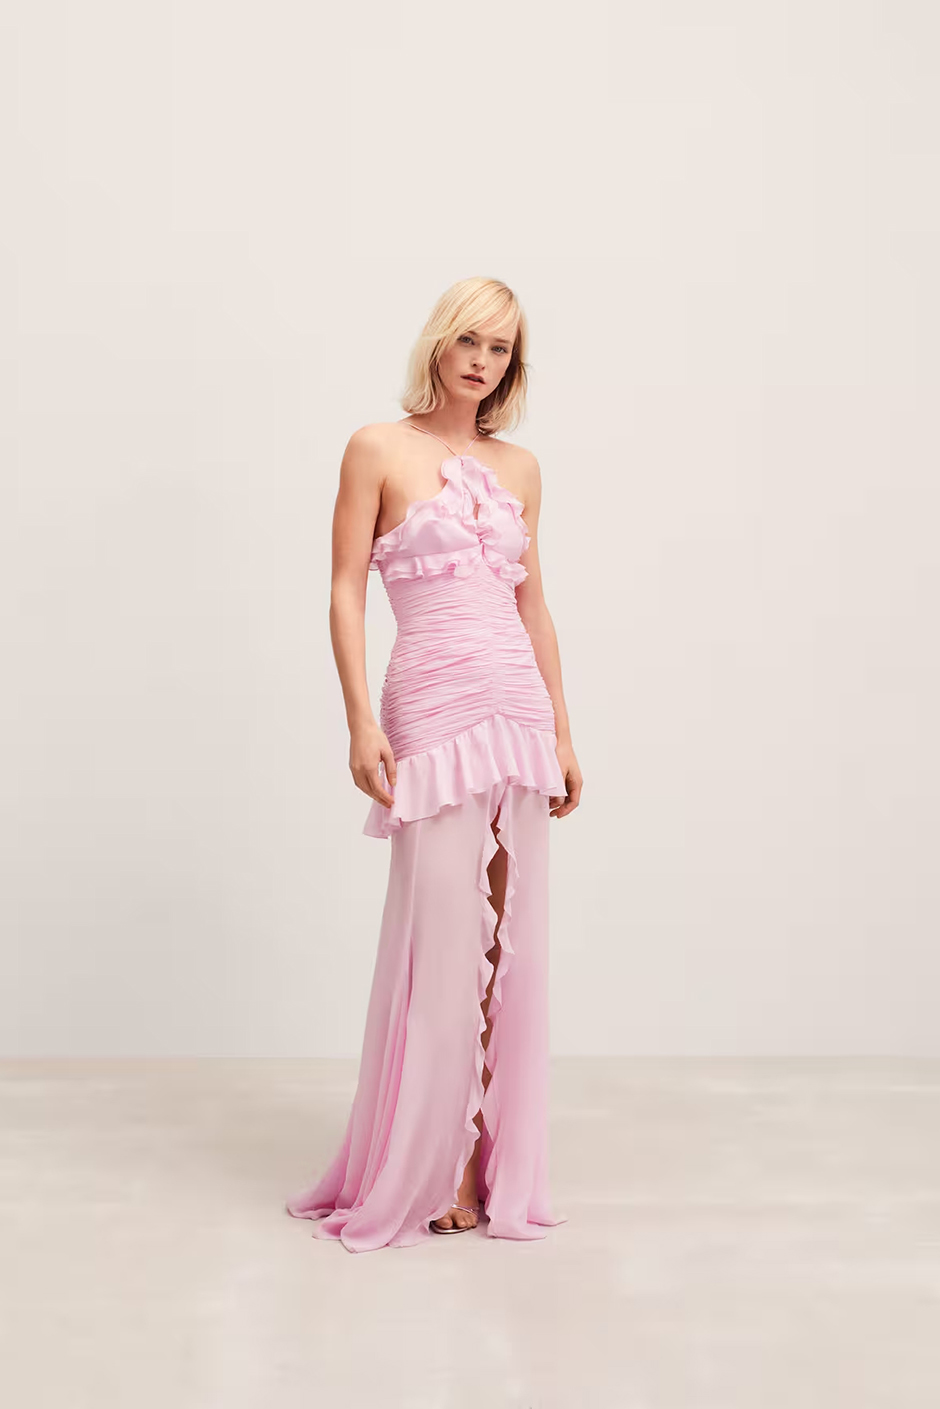 Pink wedding guest dress from Mango with halter neckline, draped design and ruffles